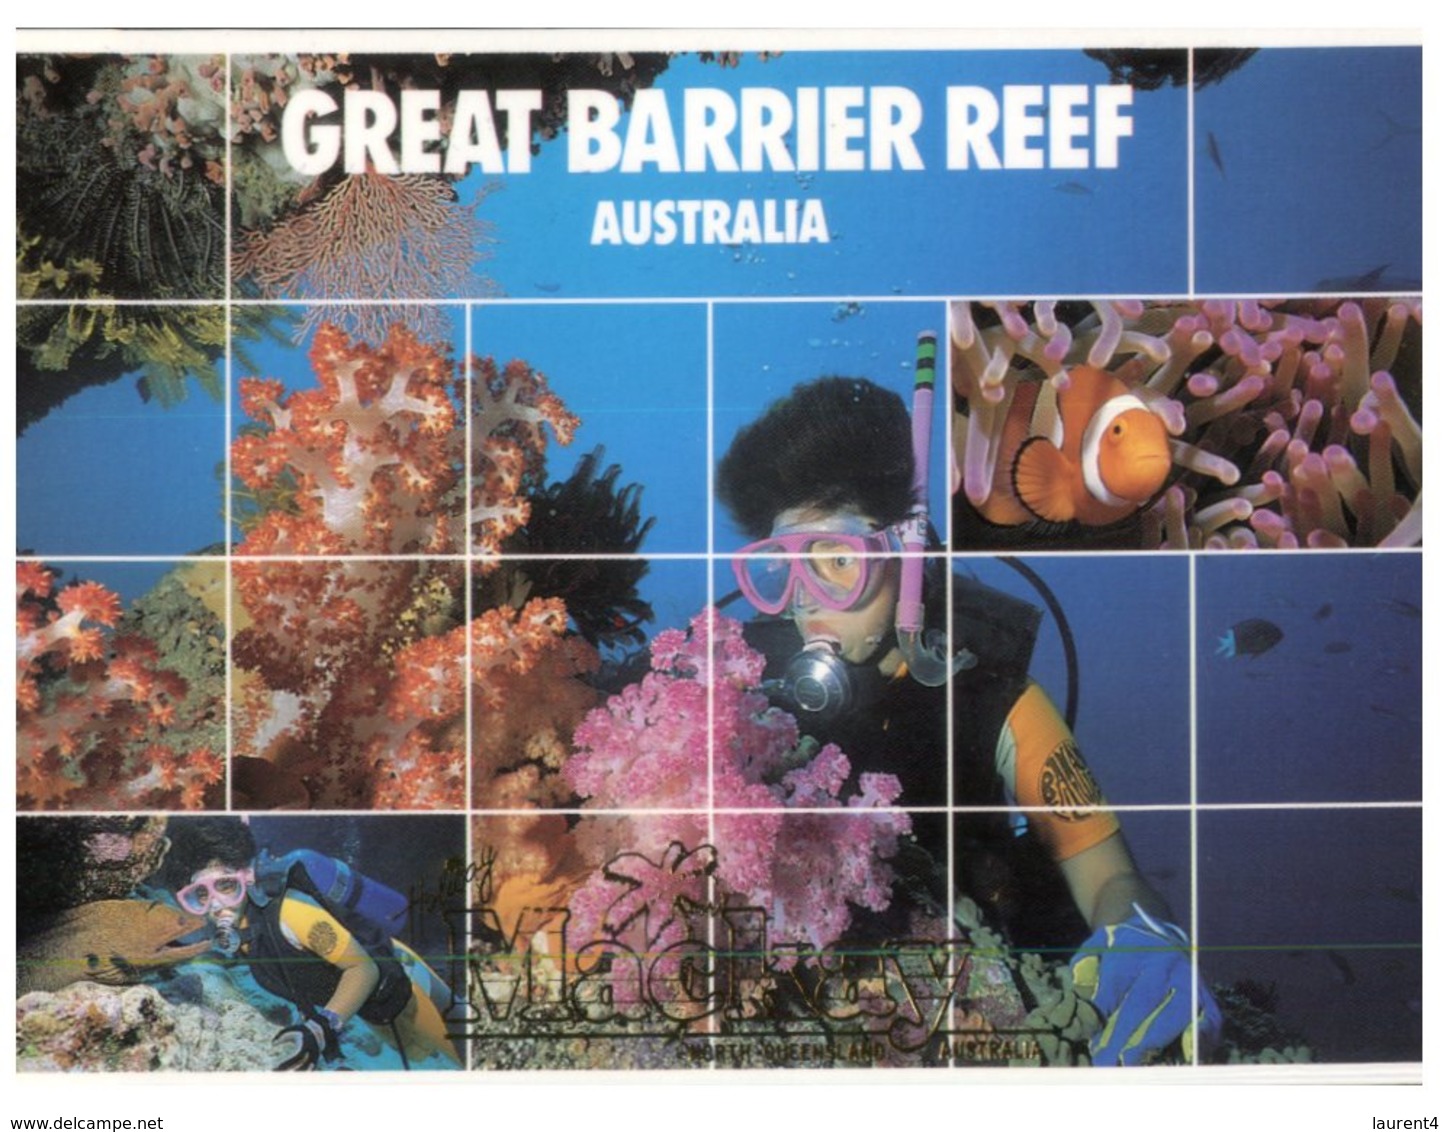 (44) Australia Postcard - (with Possum Stamp) - QLD - Great Barrier Reef Scuba Diver - Great Barrier Reef